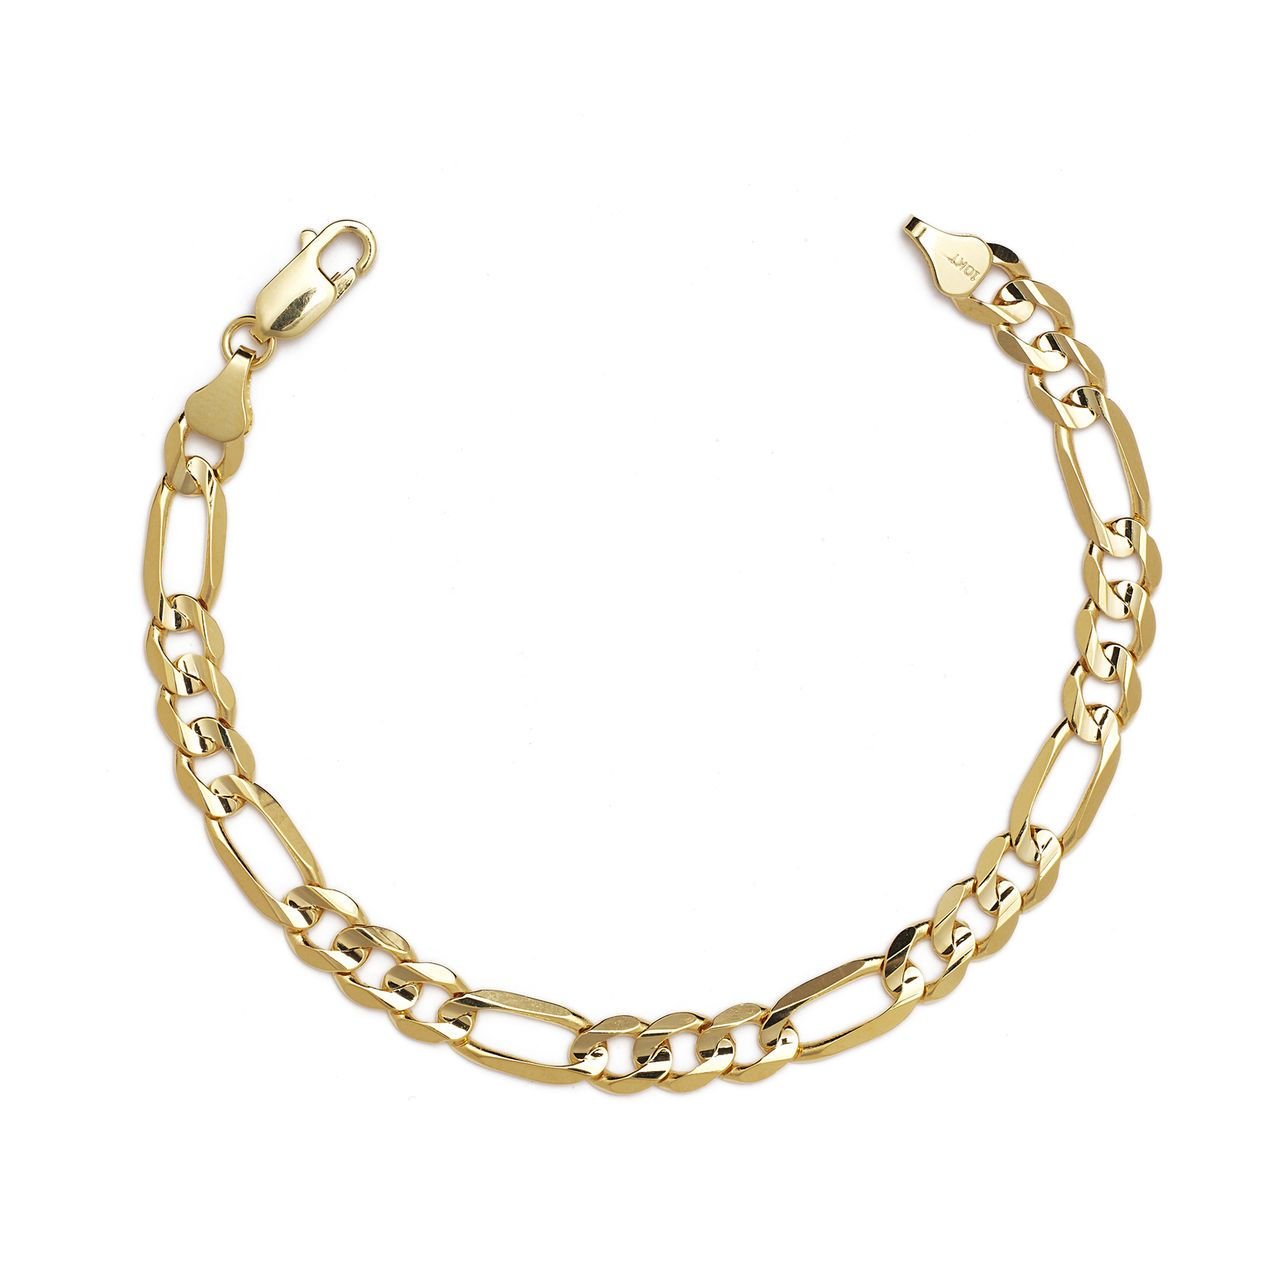 10k Yellow Gold Figaro Chain Bracelet with Concave Look,  0.25 Inch (6.3mm)